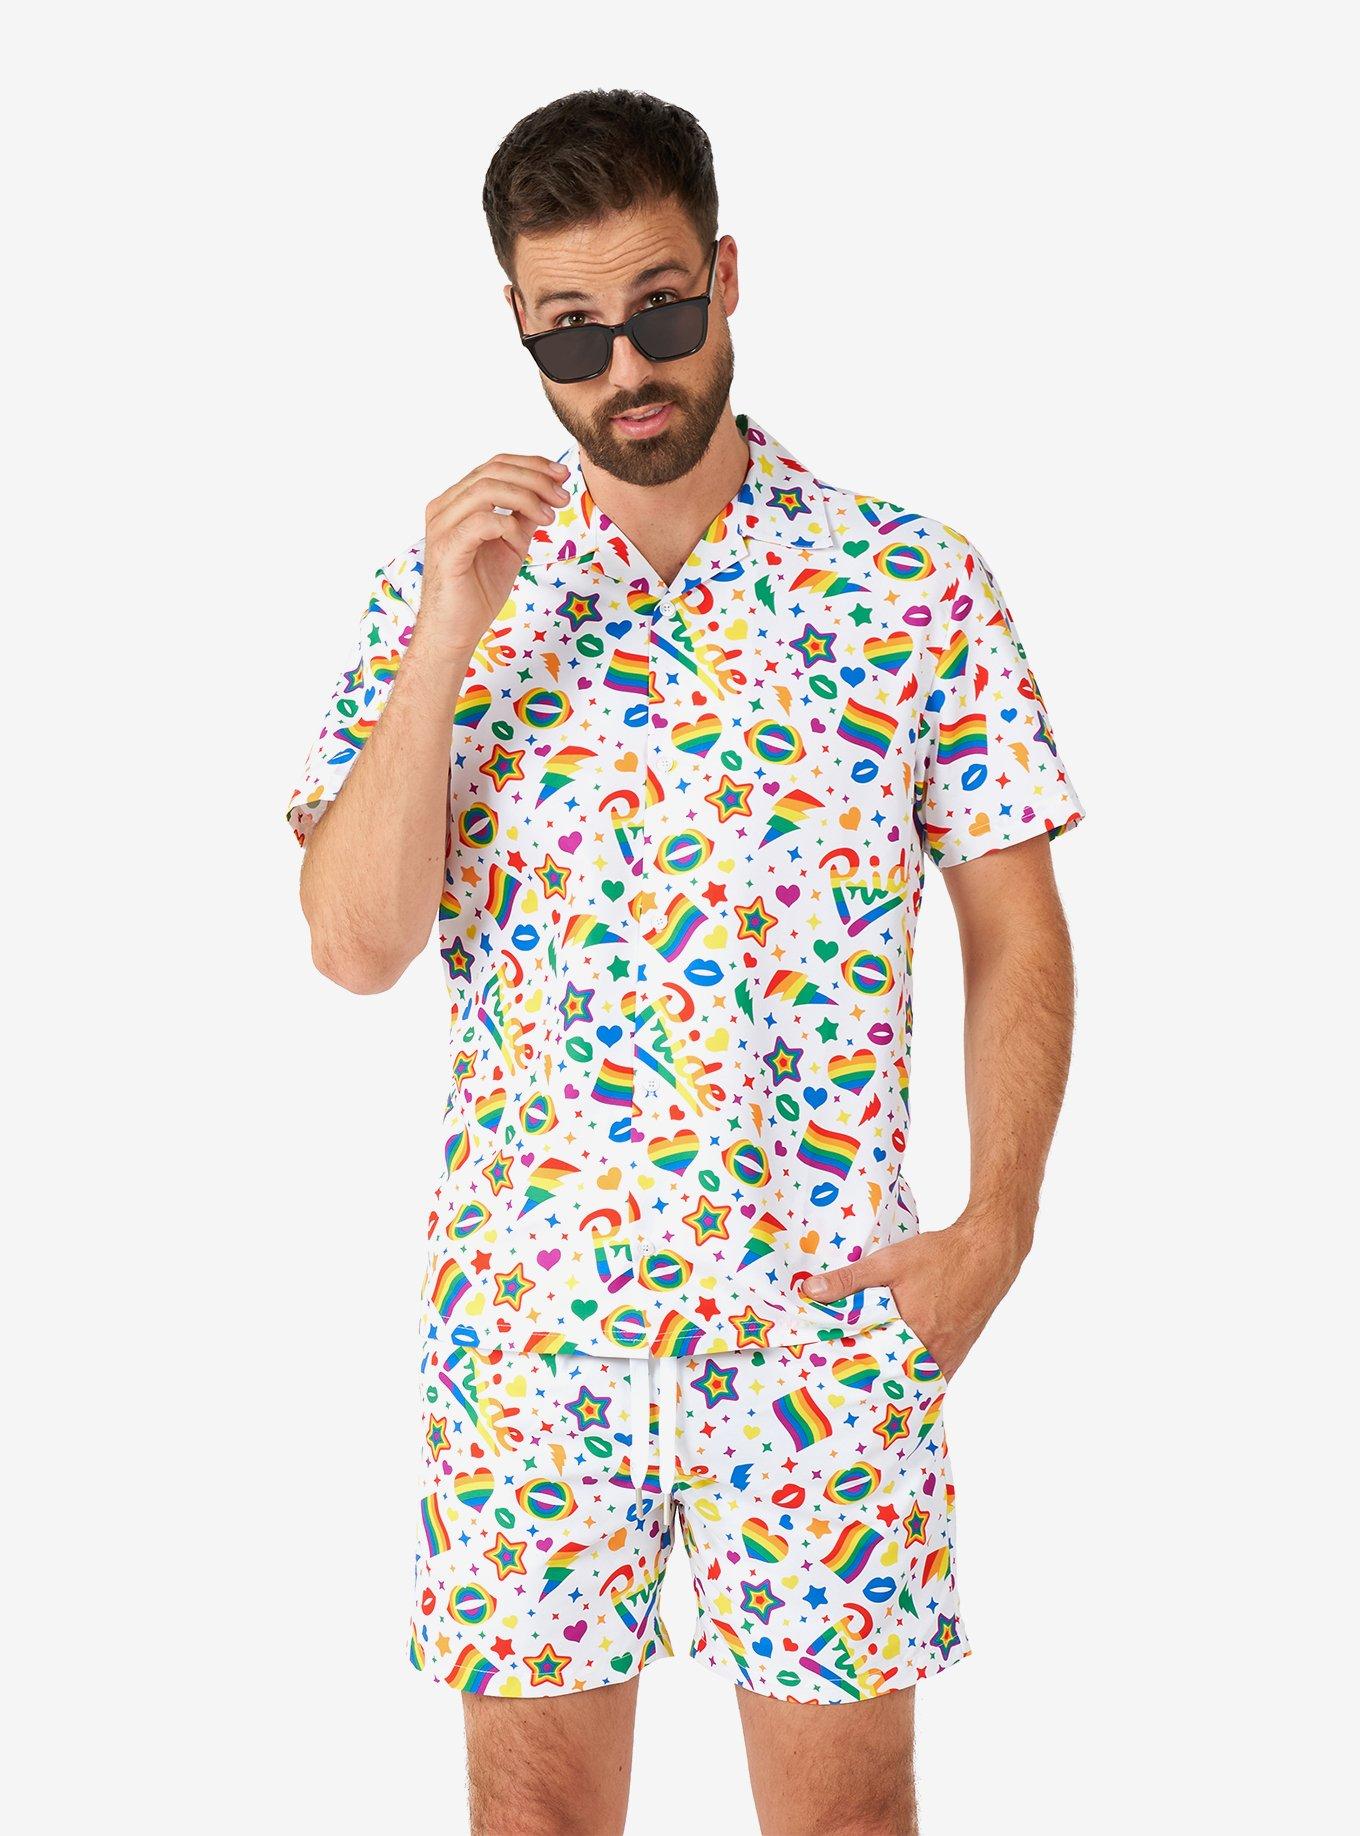 Pride Icons White Button-Up Shirt and Short, MULTI, hi-res